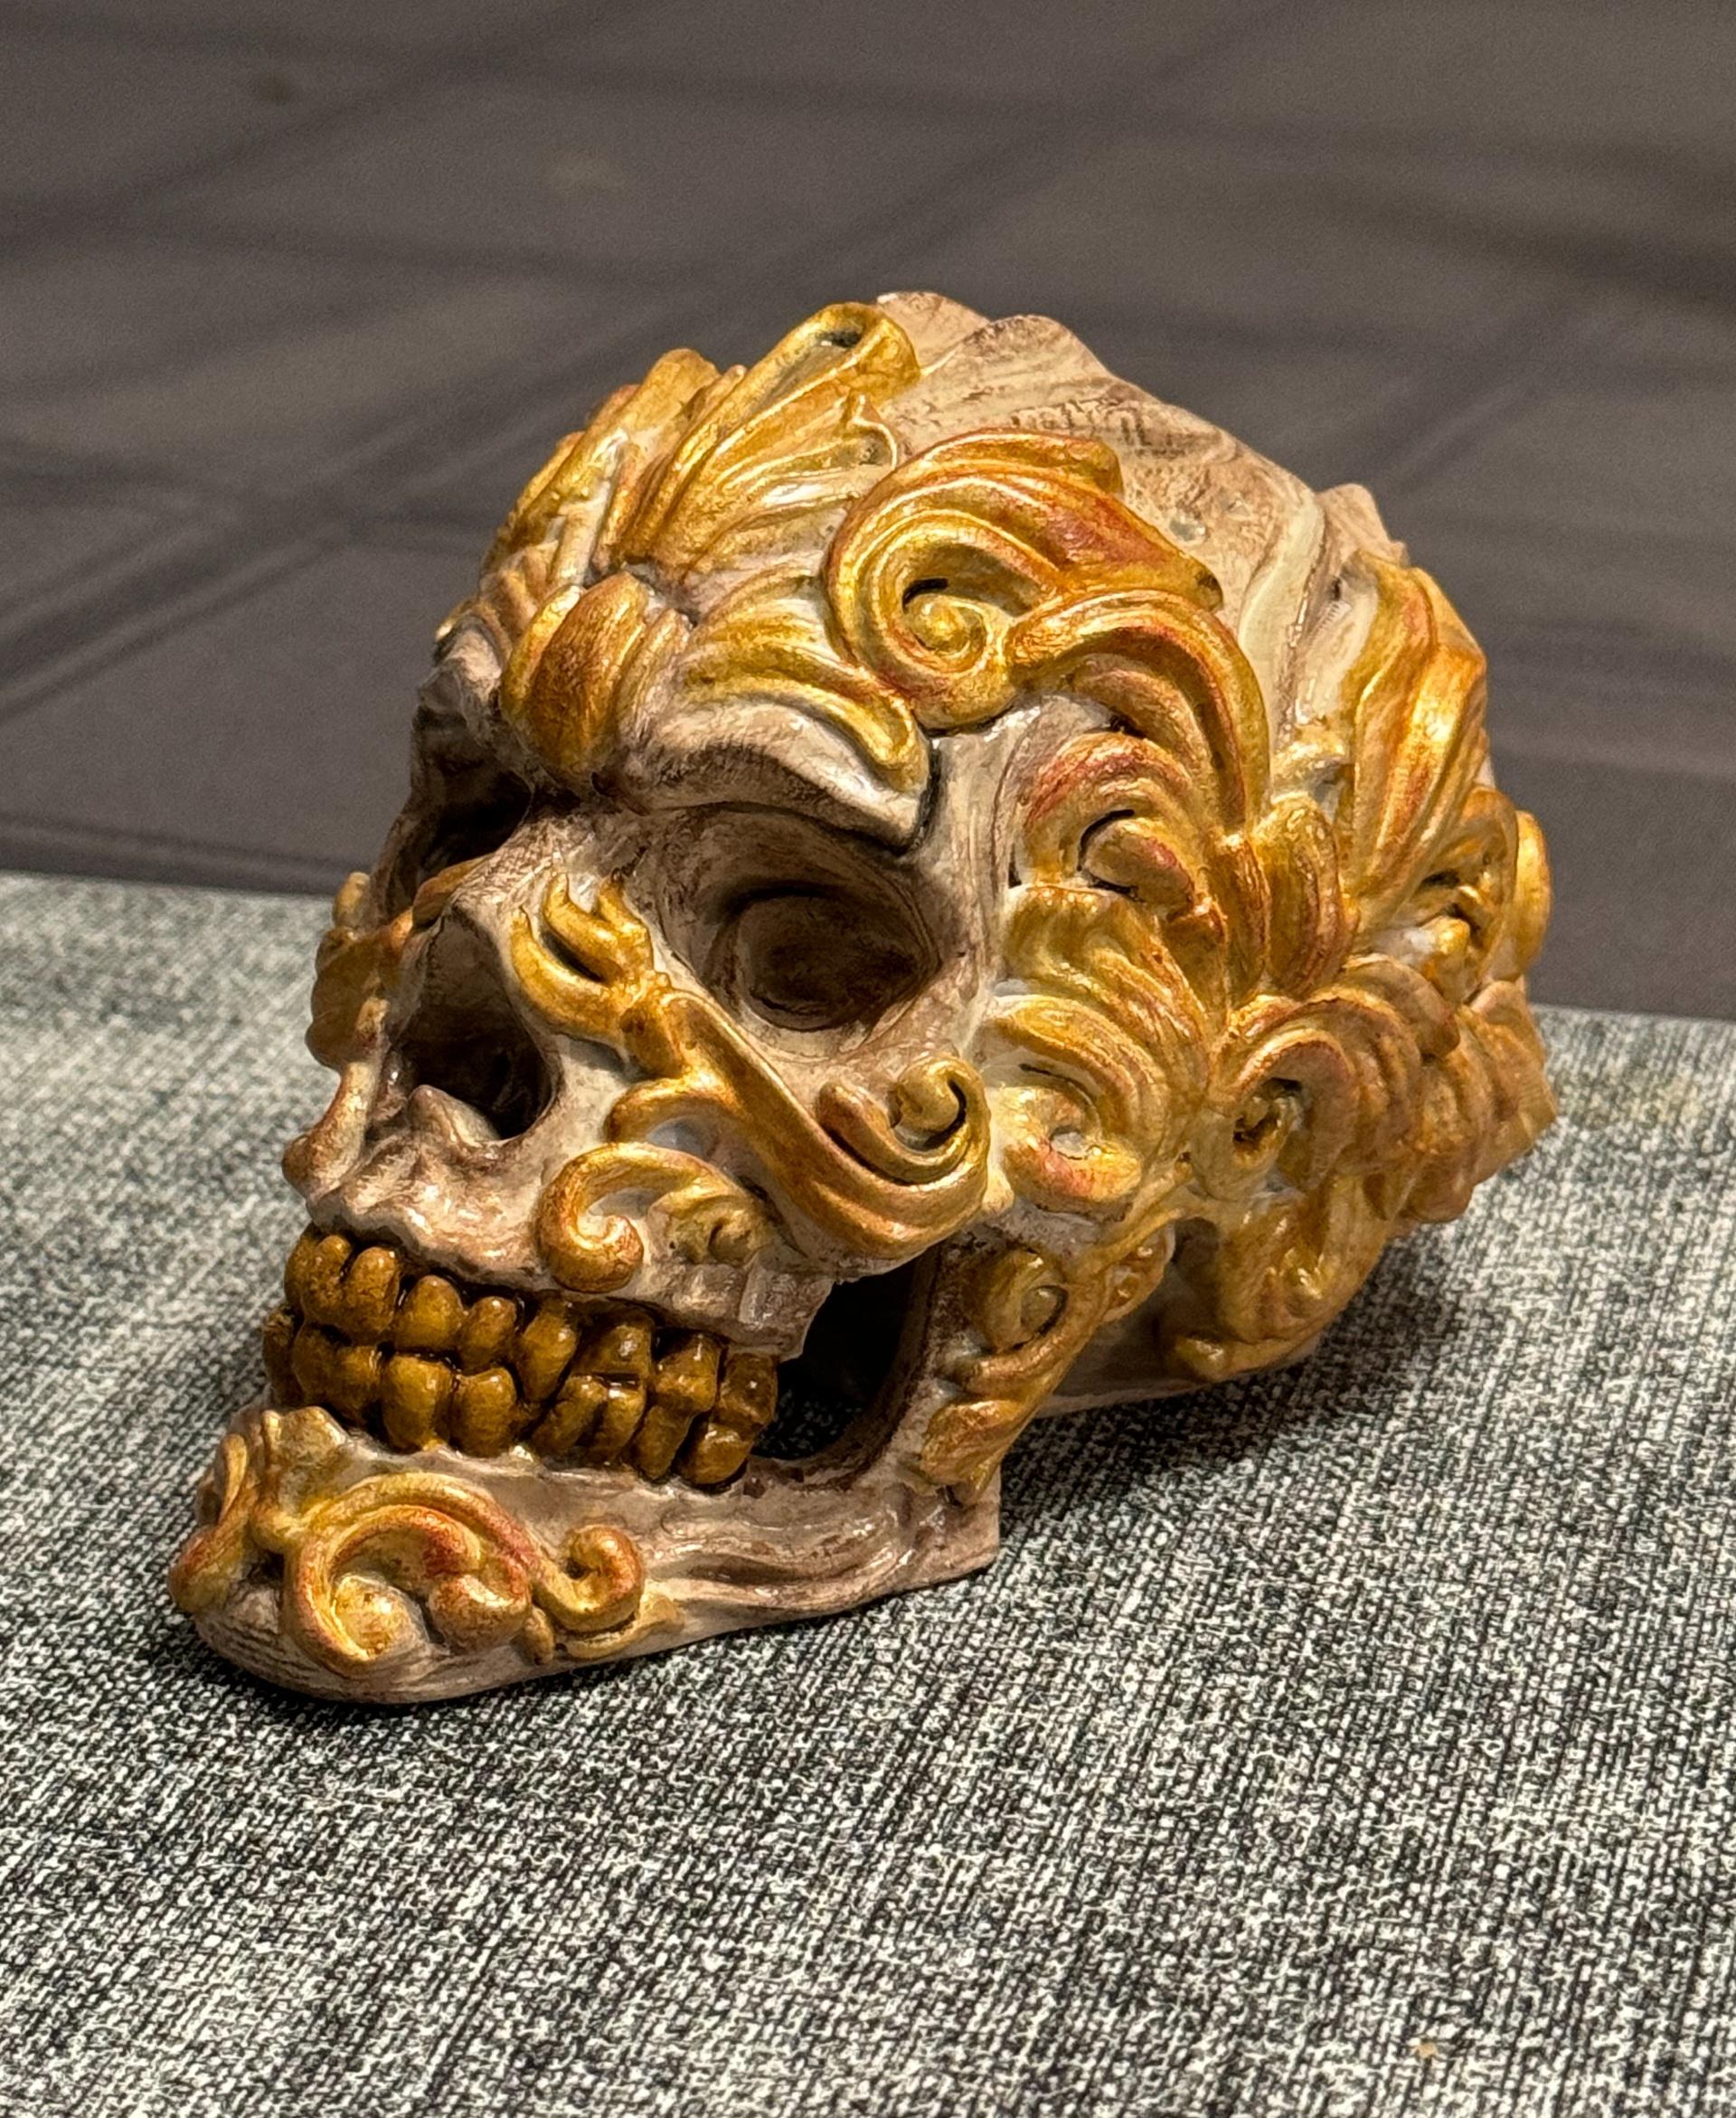 Ornate Skull - Rococo Scroll - Decoration - Turned out great. - 3d model